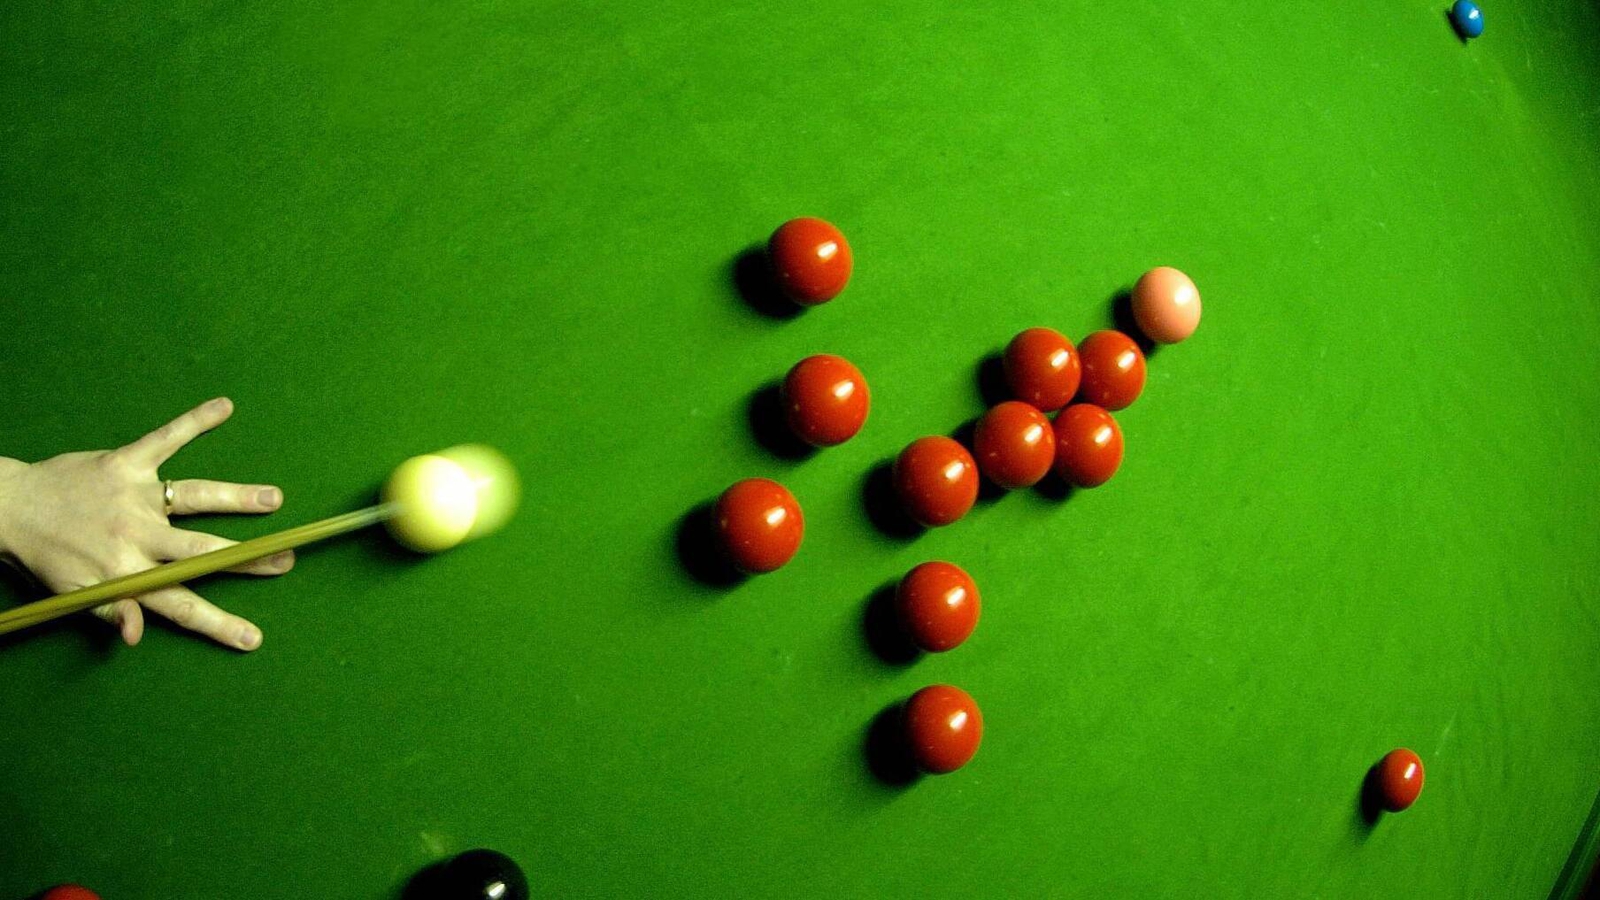 Can pro snooker return to the Republic of Ireland?